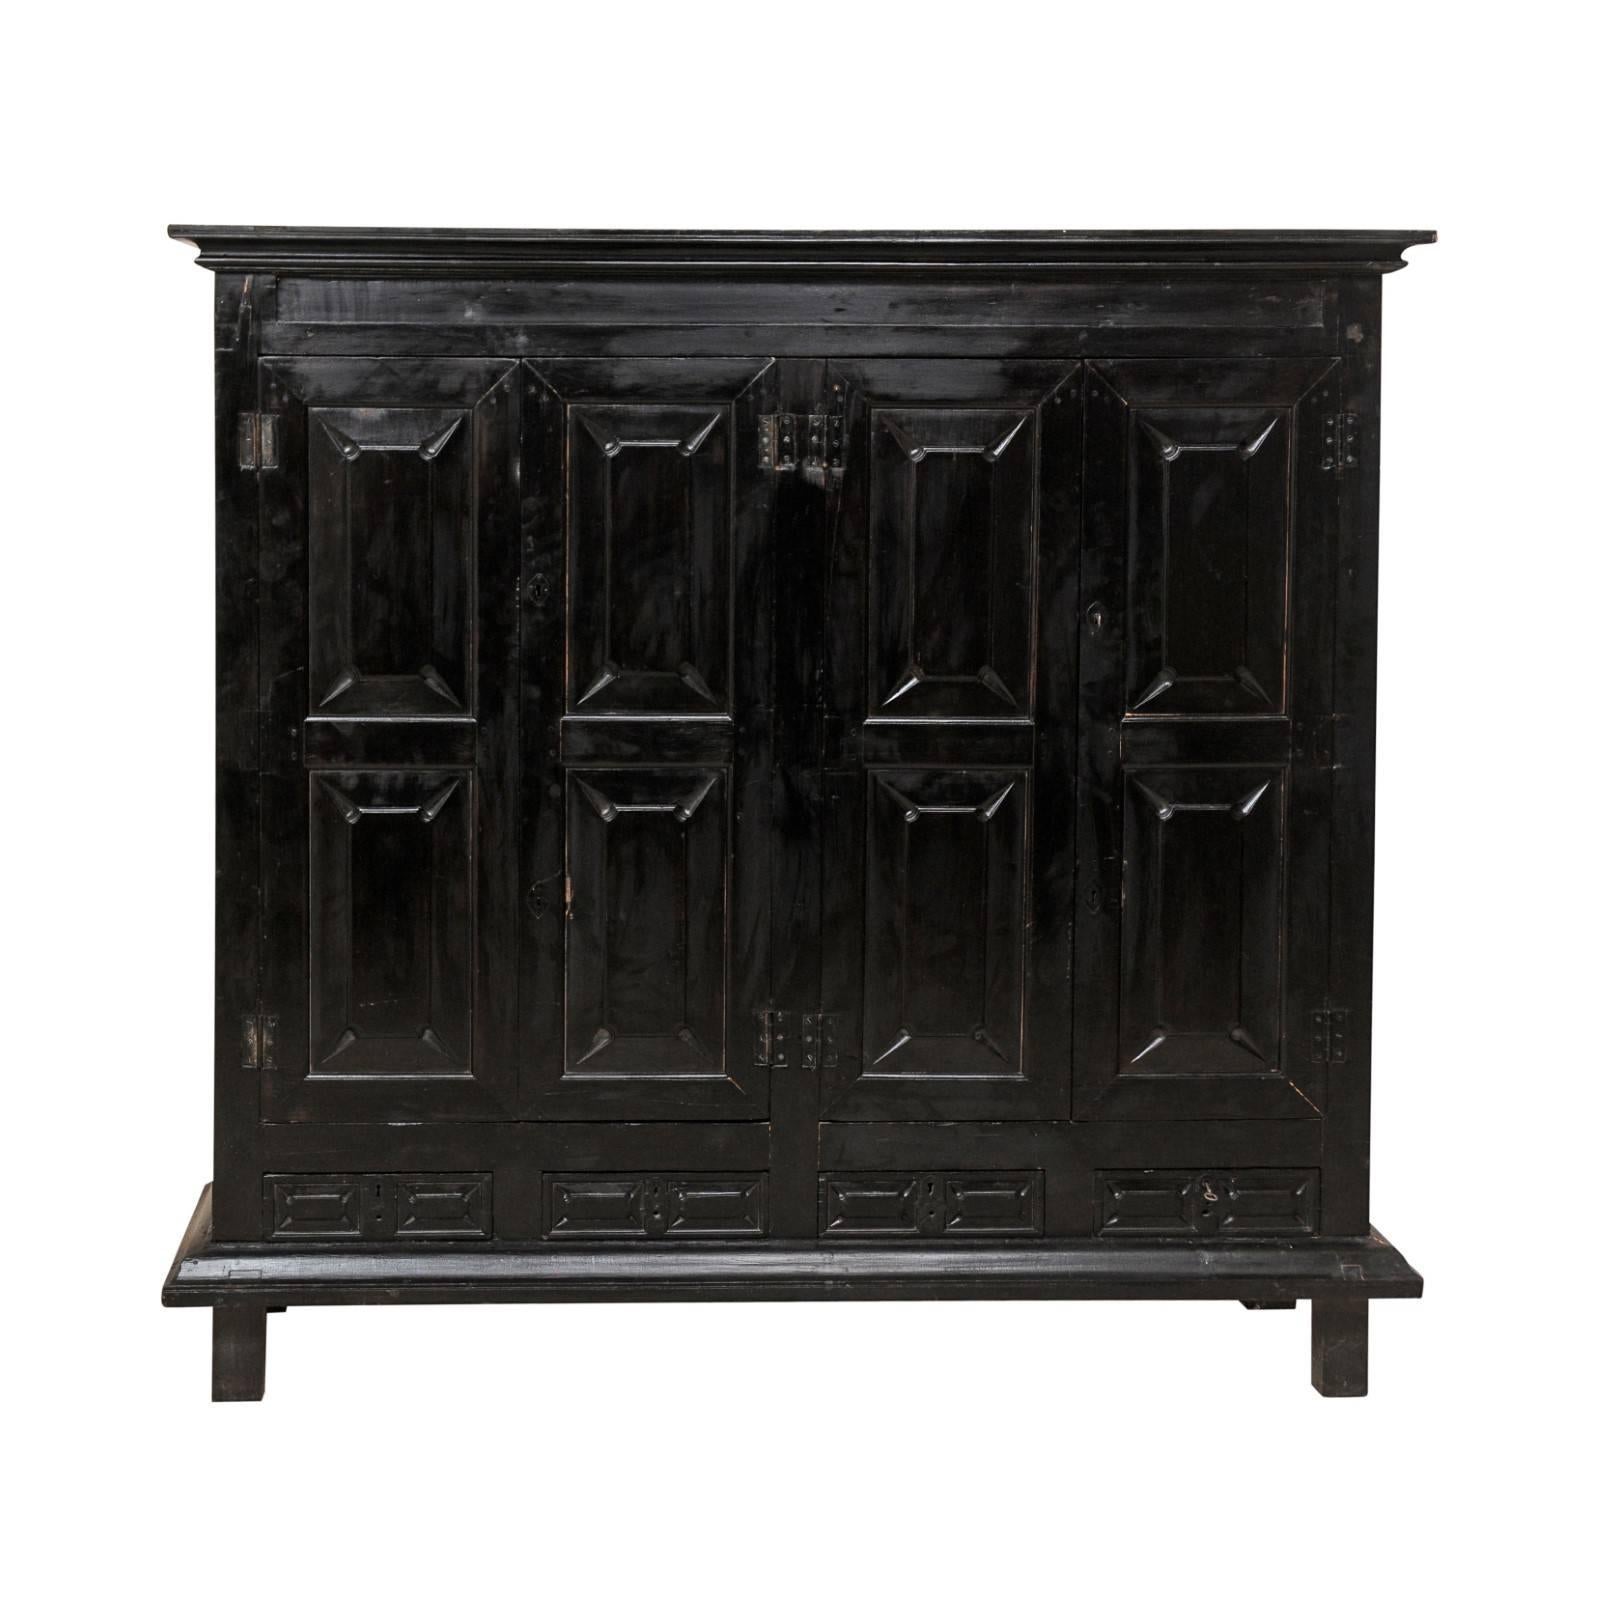 British Colonial Ebonized Wood Cabinet w/Four Paneled Doors, 6 ft x 6.5 ft Tall 